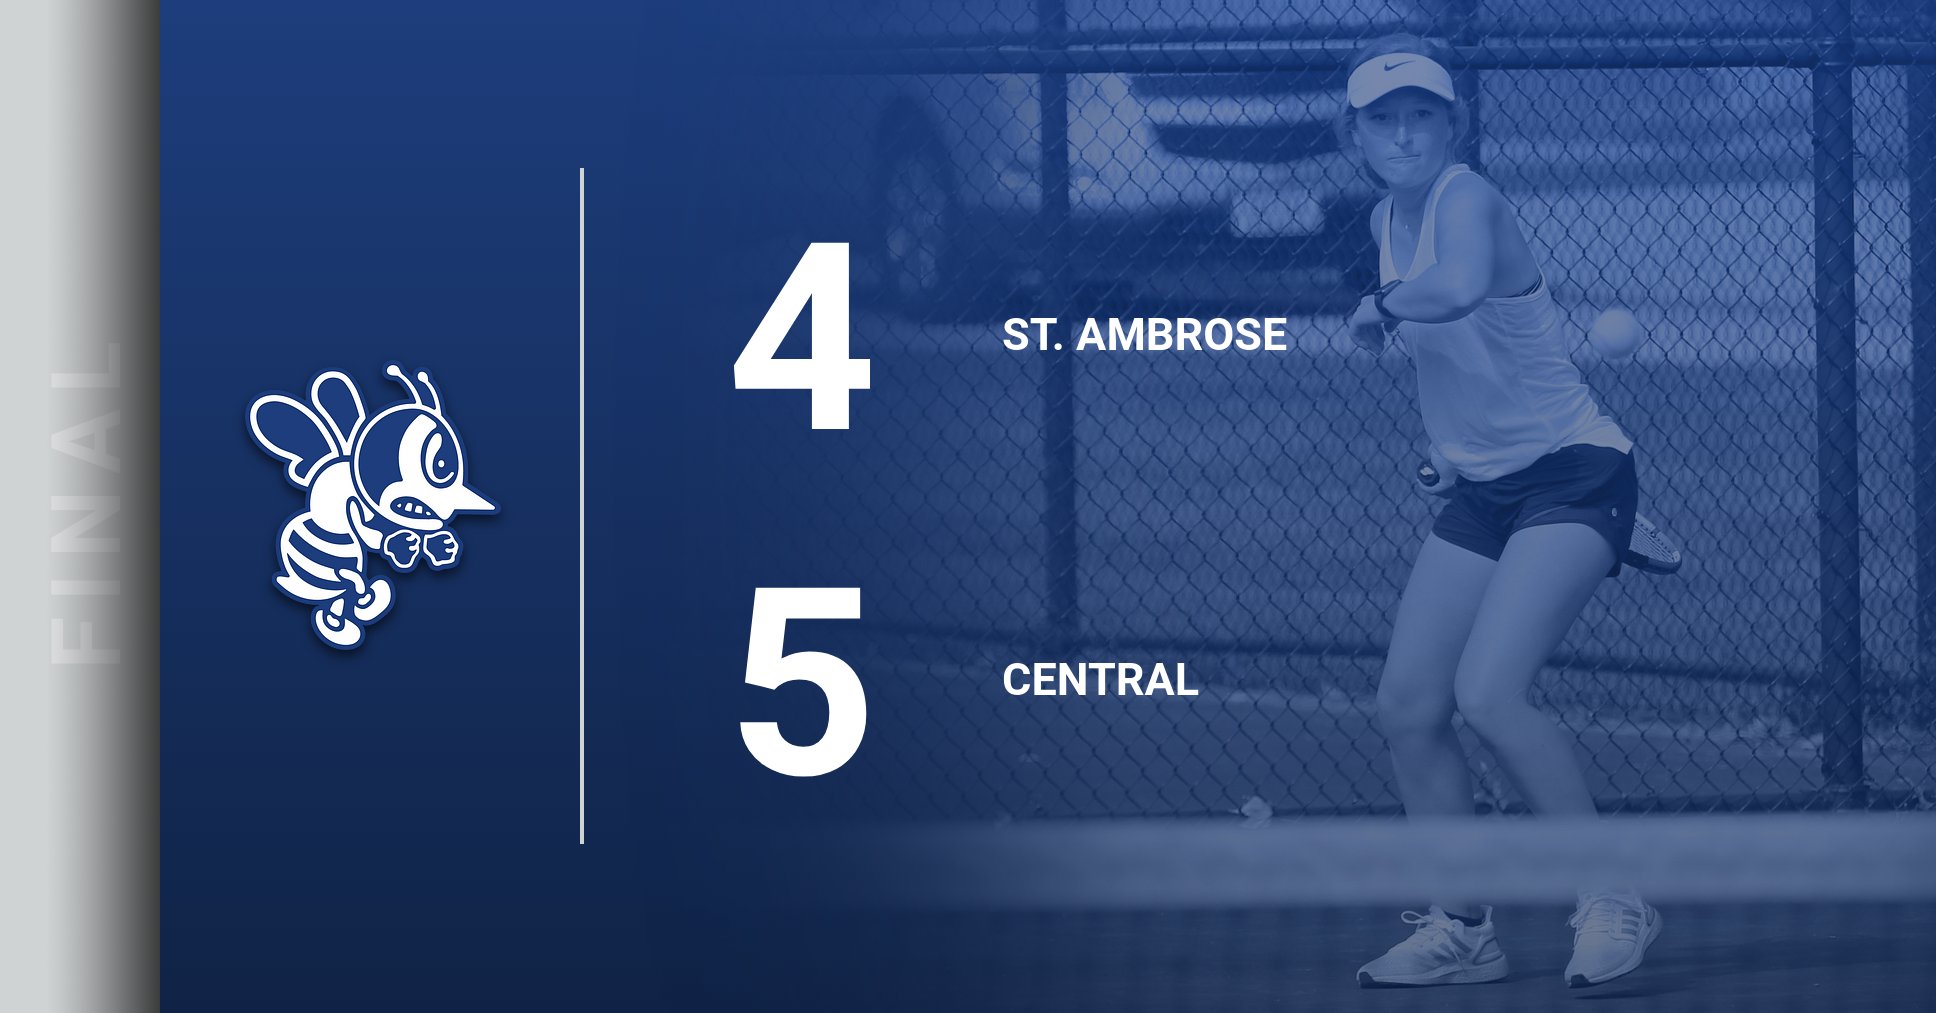 St. Ambrose drops 5-4 decision at Central